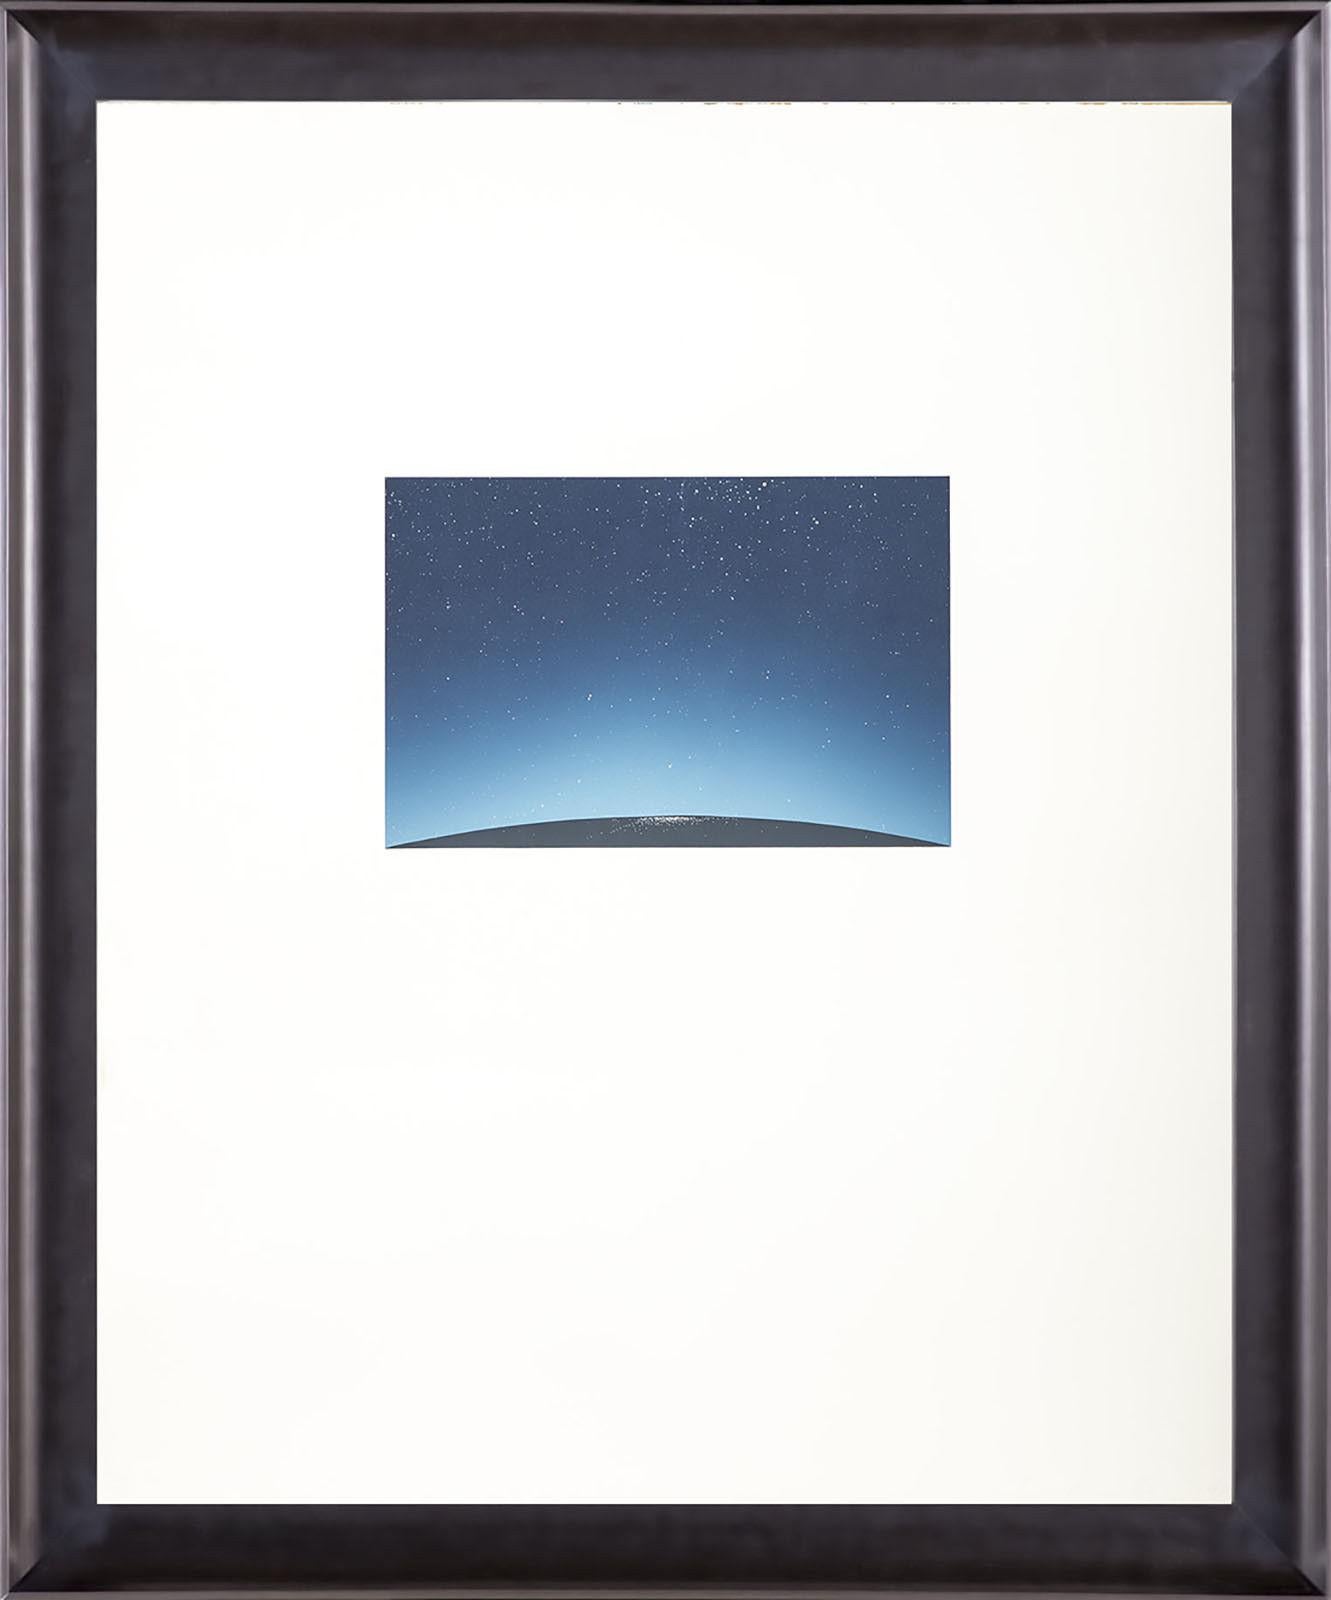 Artist: Ed Ruscha - Any Town in the U.S.A.
Medium: Screenprint in color on white Stonehenge, 1981
Edition: 28/150 (33 Artist’s Proofs precede the edition)
Signed and dated in pencil, full margins
Published by the artist for the re-election campaign